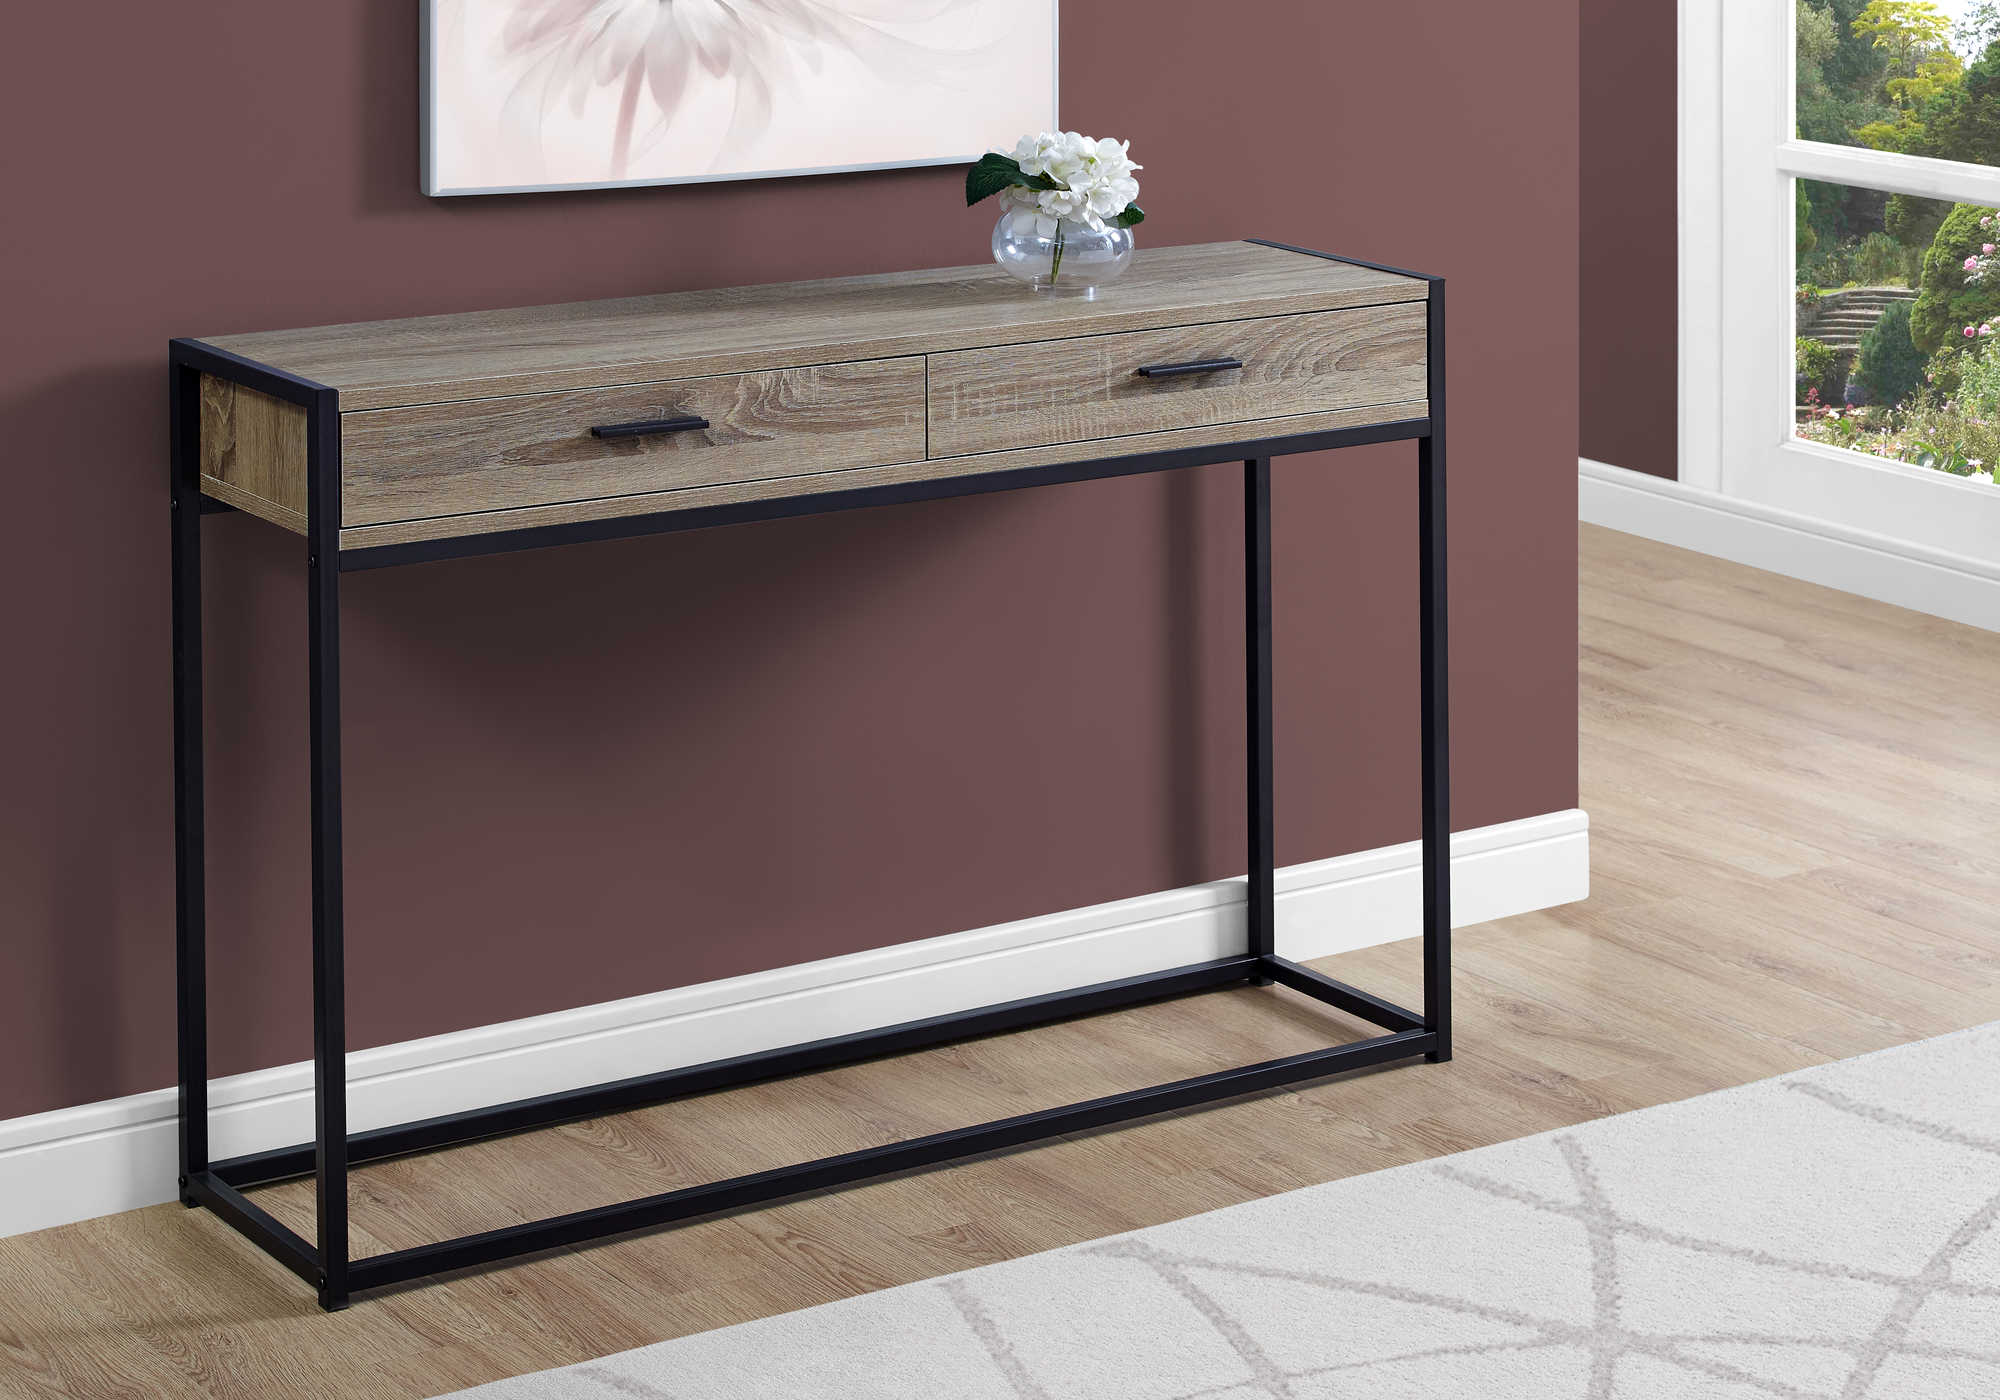 BEDROOM ACCENT CONSOLE TABLE - 48"L / DARK TAUPE / BLACK HALL CONSOLE